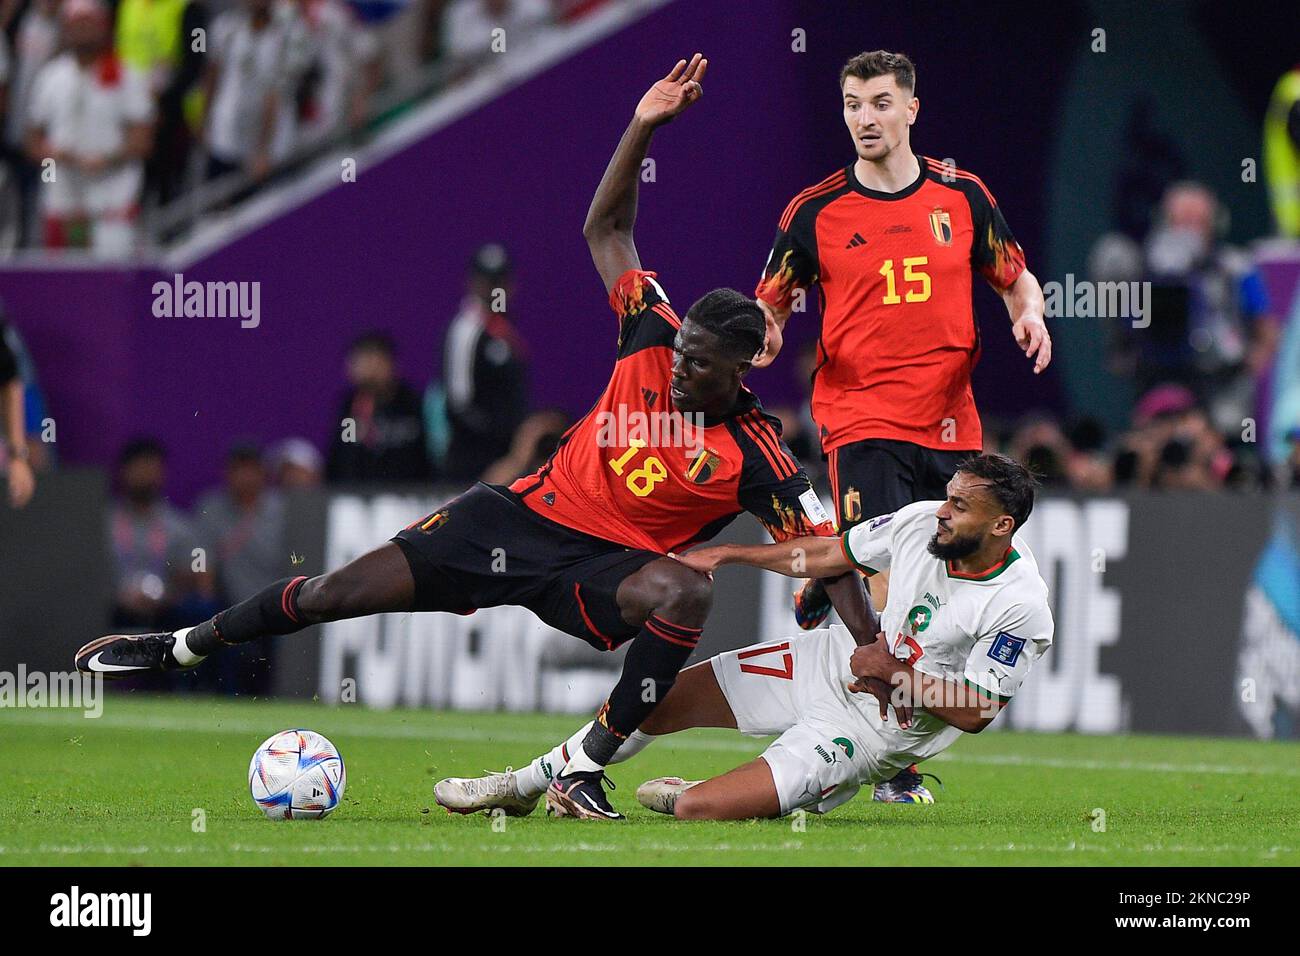 DOHA, QATAR - NOVEMBER 27: Amadou Onana of Belgium battles for the ball with Sofiane Boufal of Morocco during the Group F - FIFA World Cup Qatar 2022 match between Belgium and Morocco at the Al Thumama Stadium on November 27, 2022 in Doha, Qatar (Photo by Pablo Morano/BSR Agency) Stock Photo